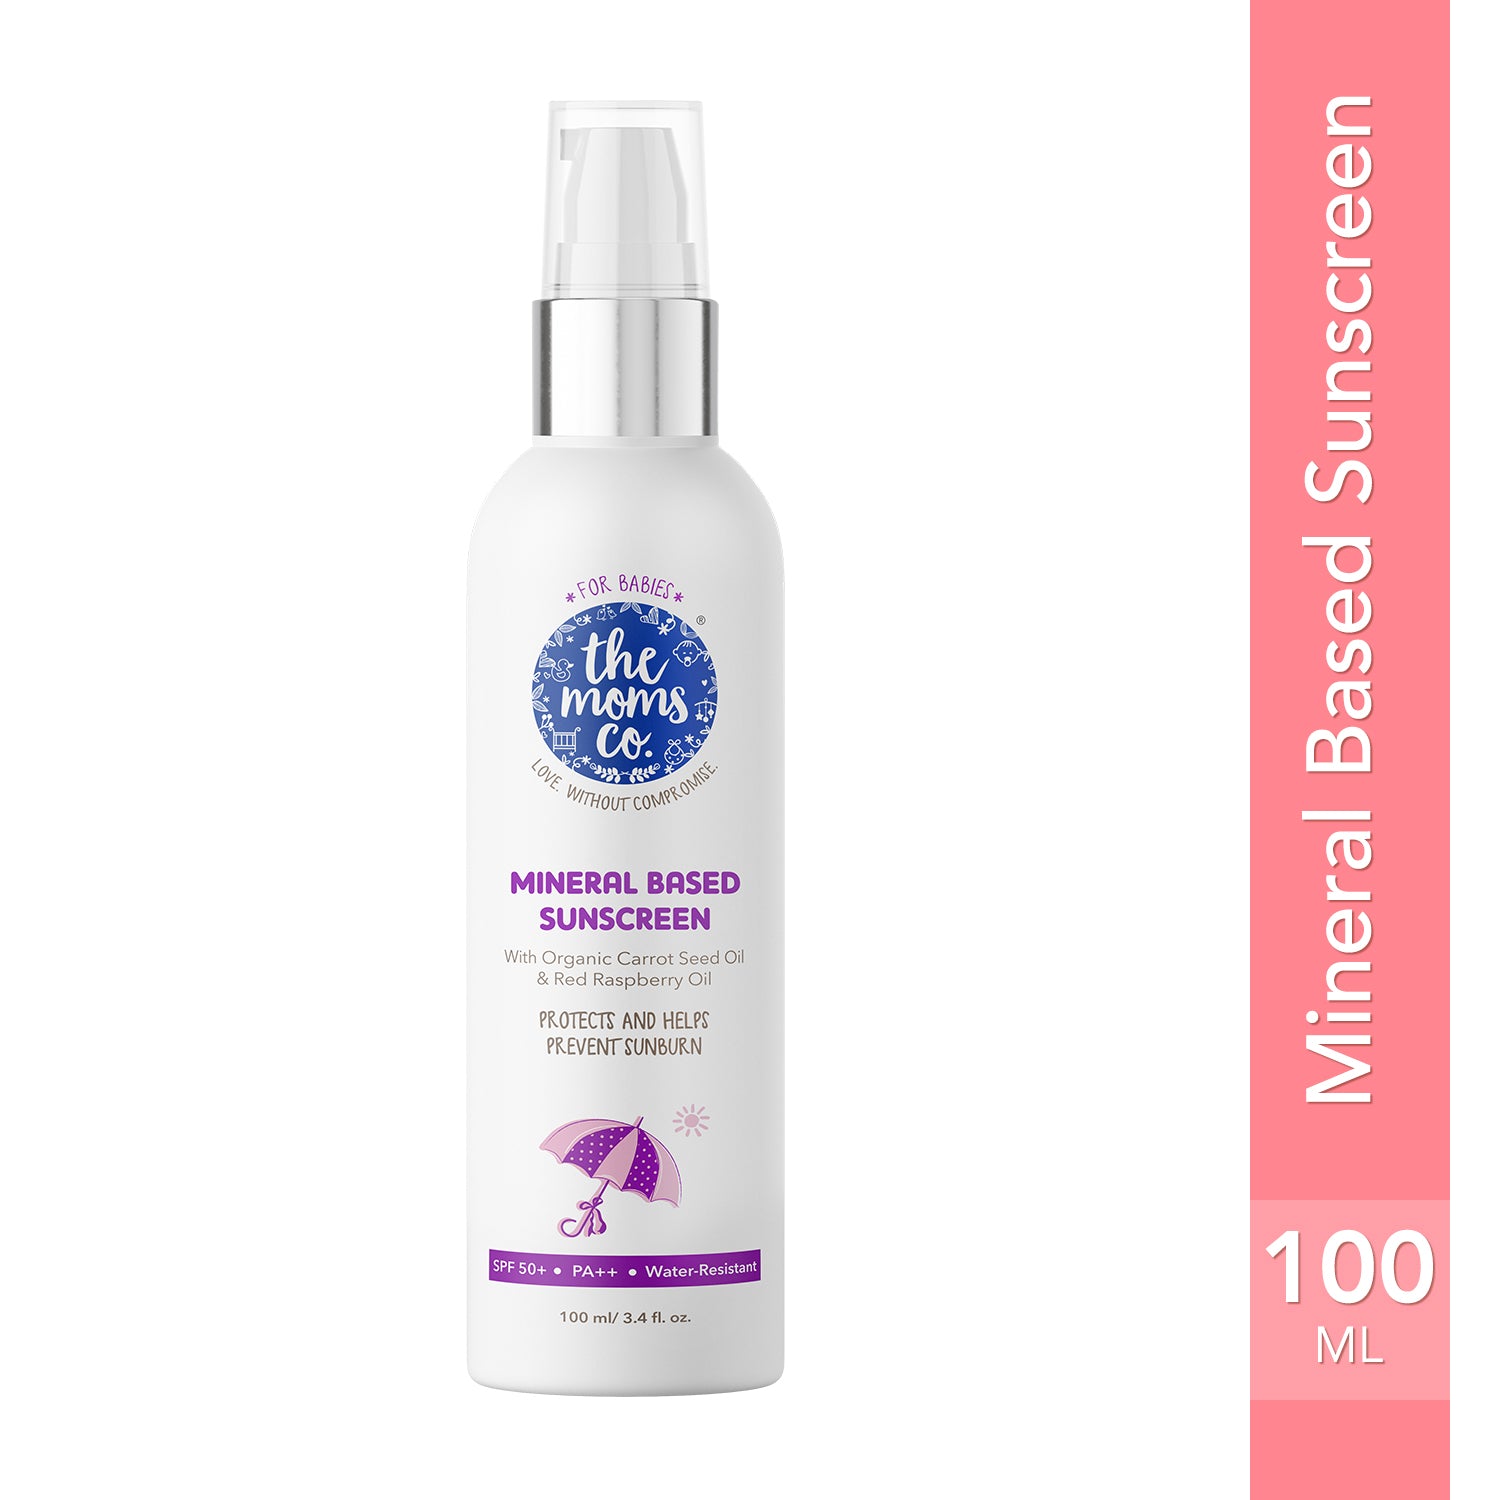 The Moms Co. Waterproof SPF 50+ Natural Mineral Based Baby Sunscreen - for UV-A & UV-B Protection with Pongamia Glabra Seed, Red Raspberry Seed and Organic Carrot Seed Oil - 100ml